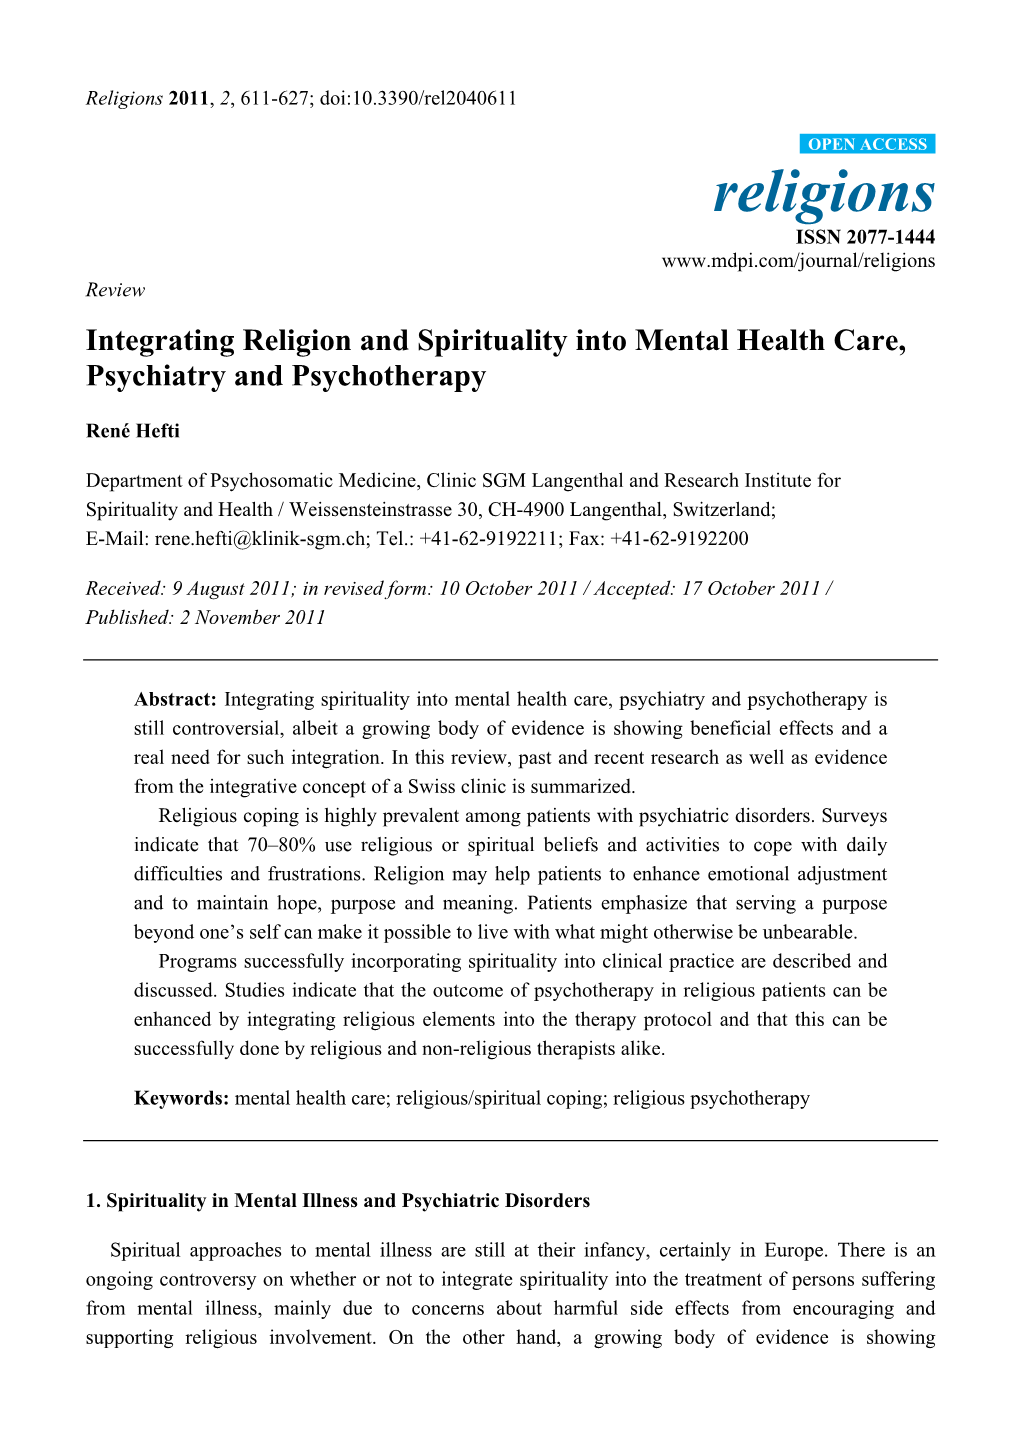 Integrating Religion and Spirituality Into Mental Health Care, Psychiatry and Psychotherapy